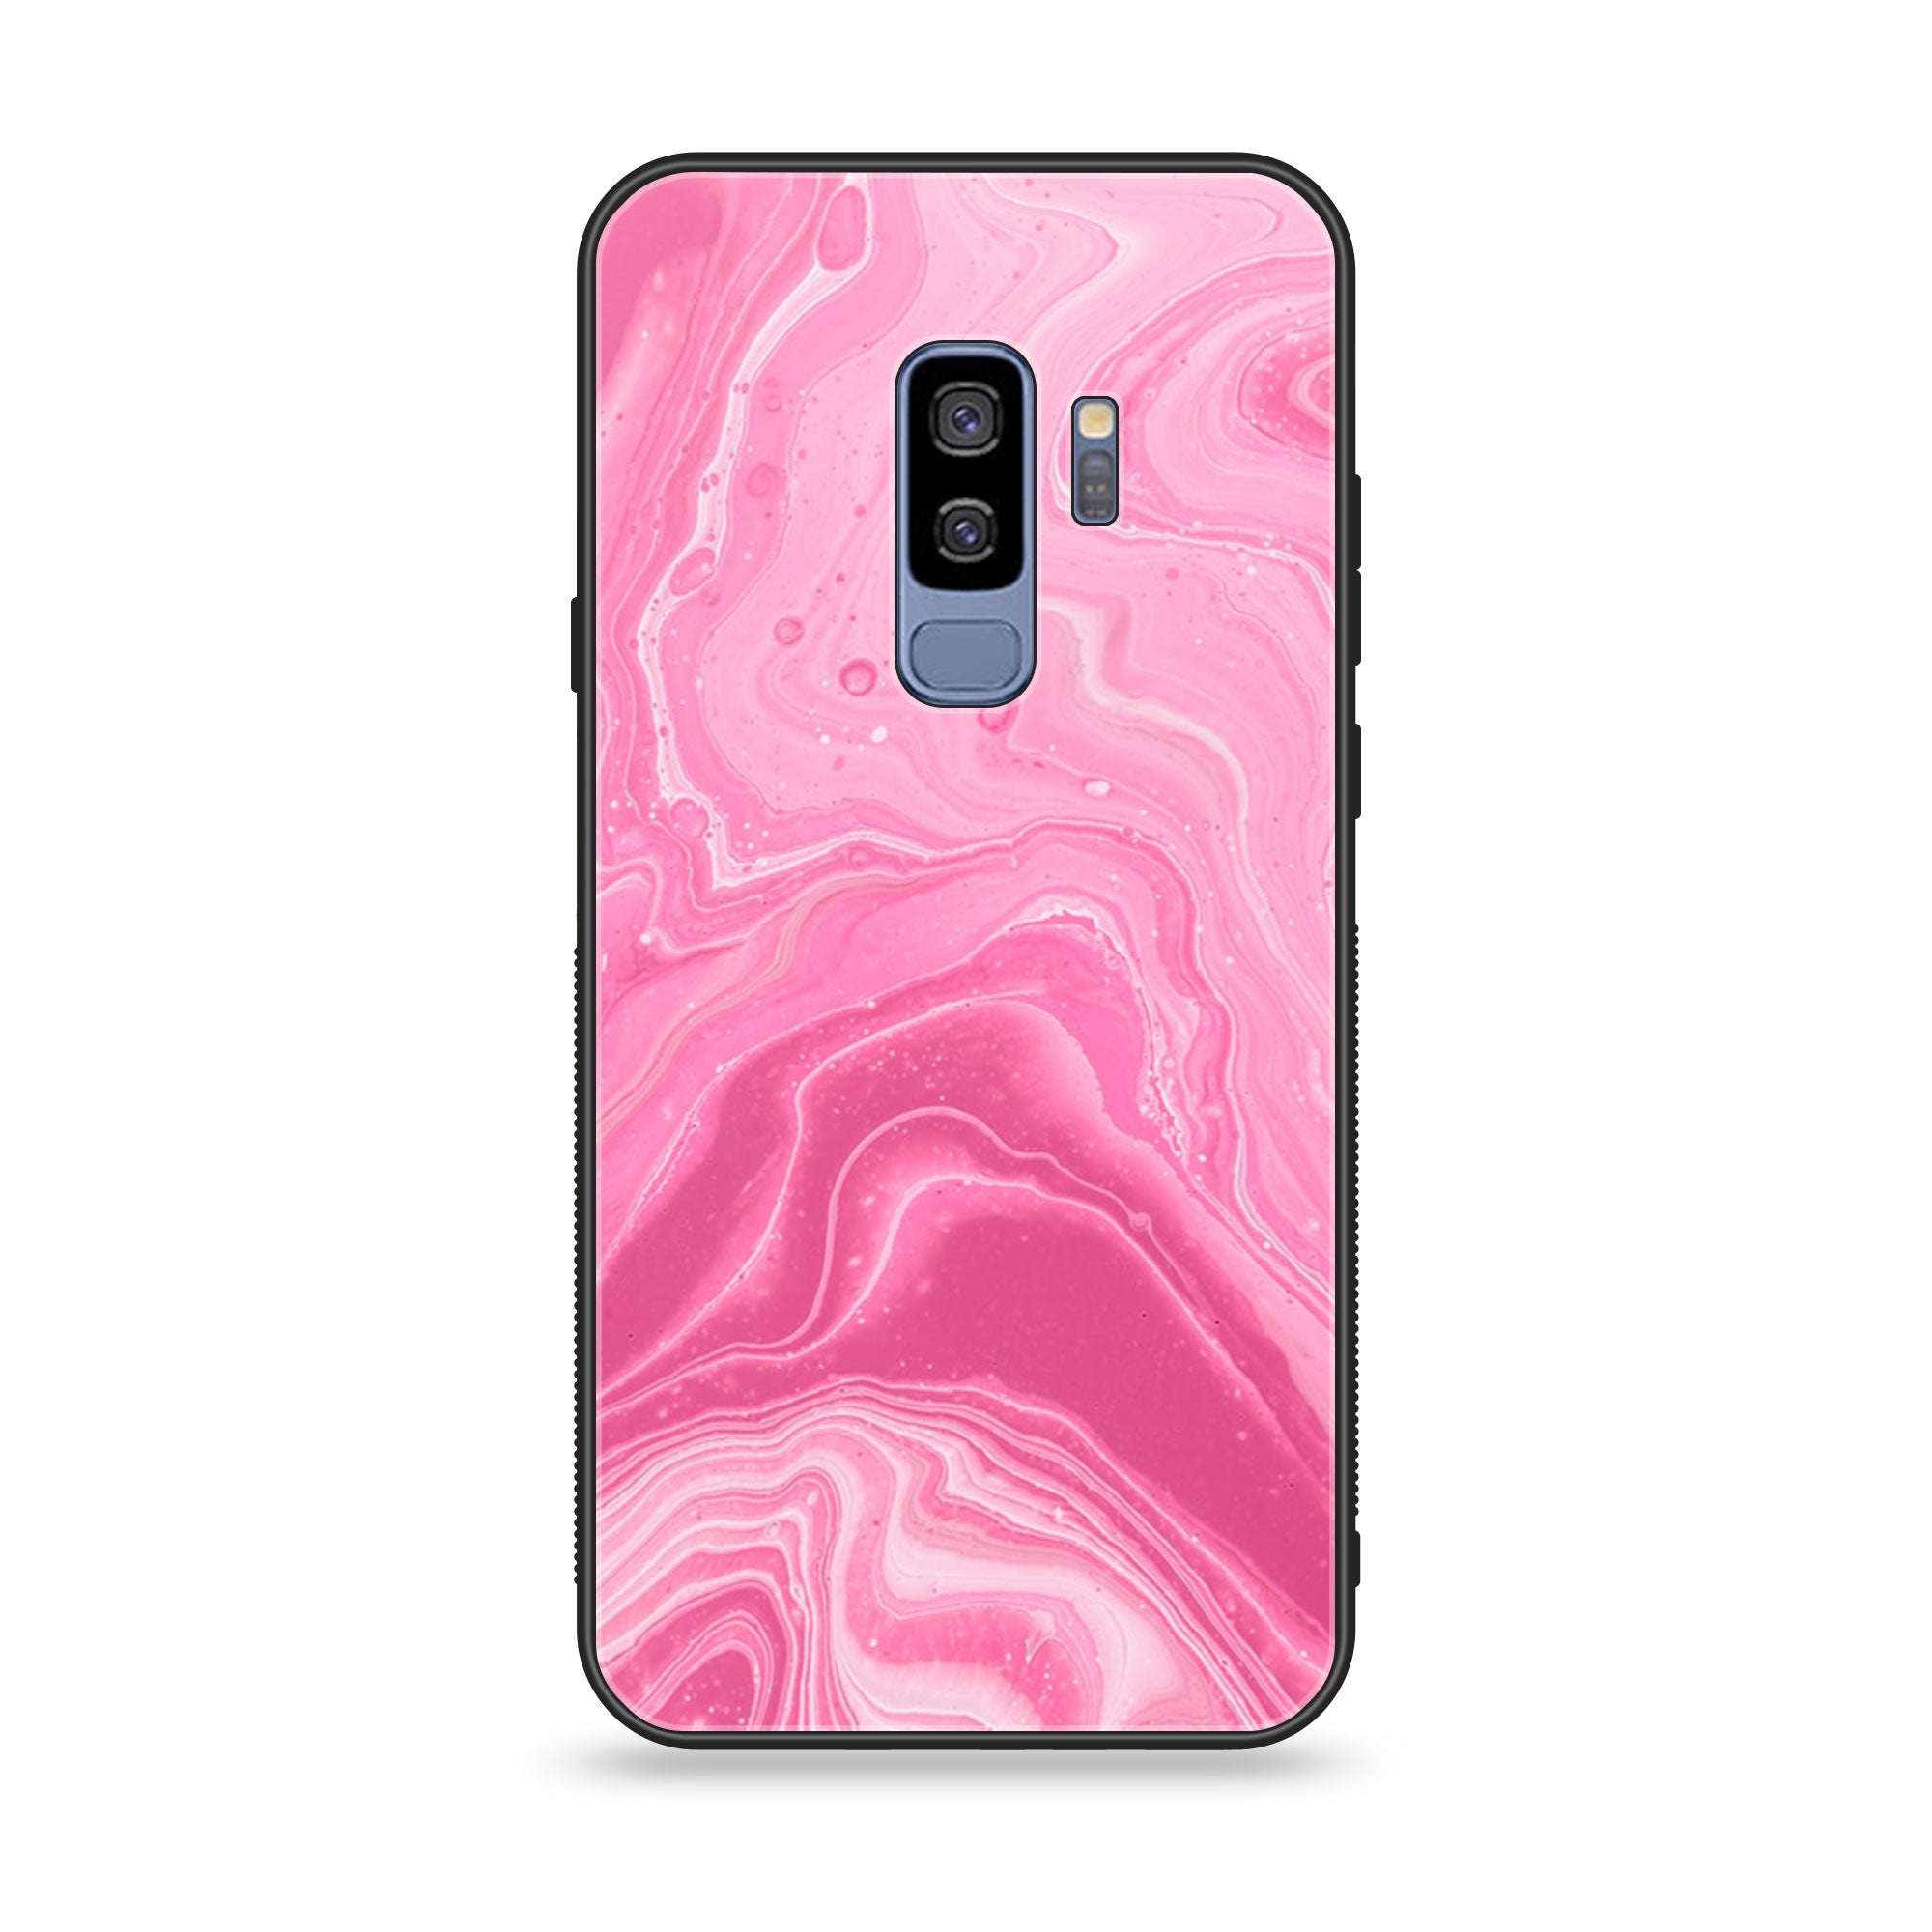 Samsung Galaxy S9 Plus - Pink Marble Series - Premium Printed Glass soft Bumper shock Proof Case